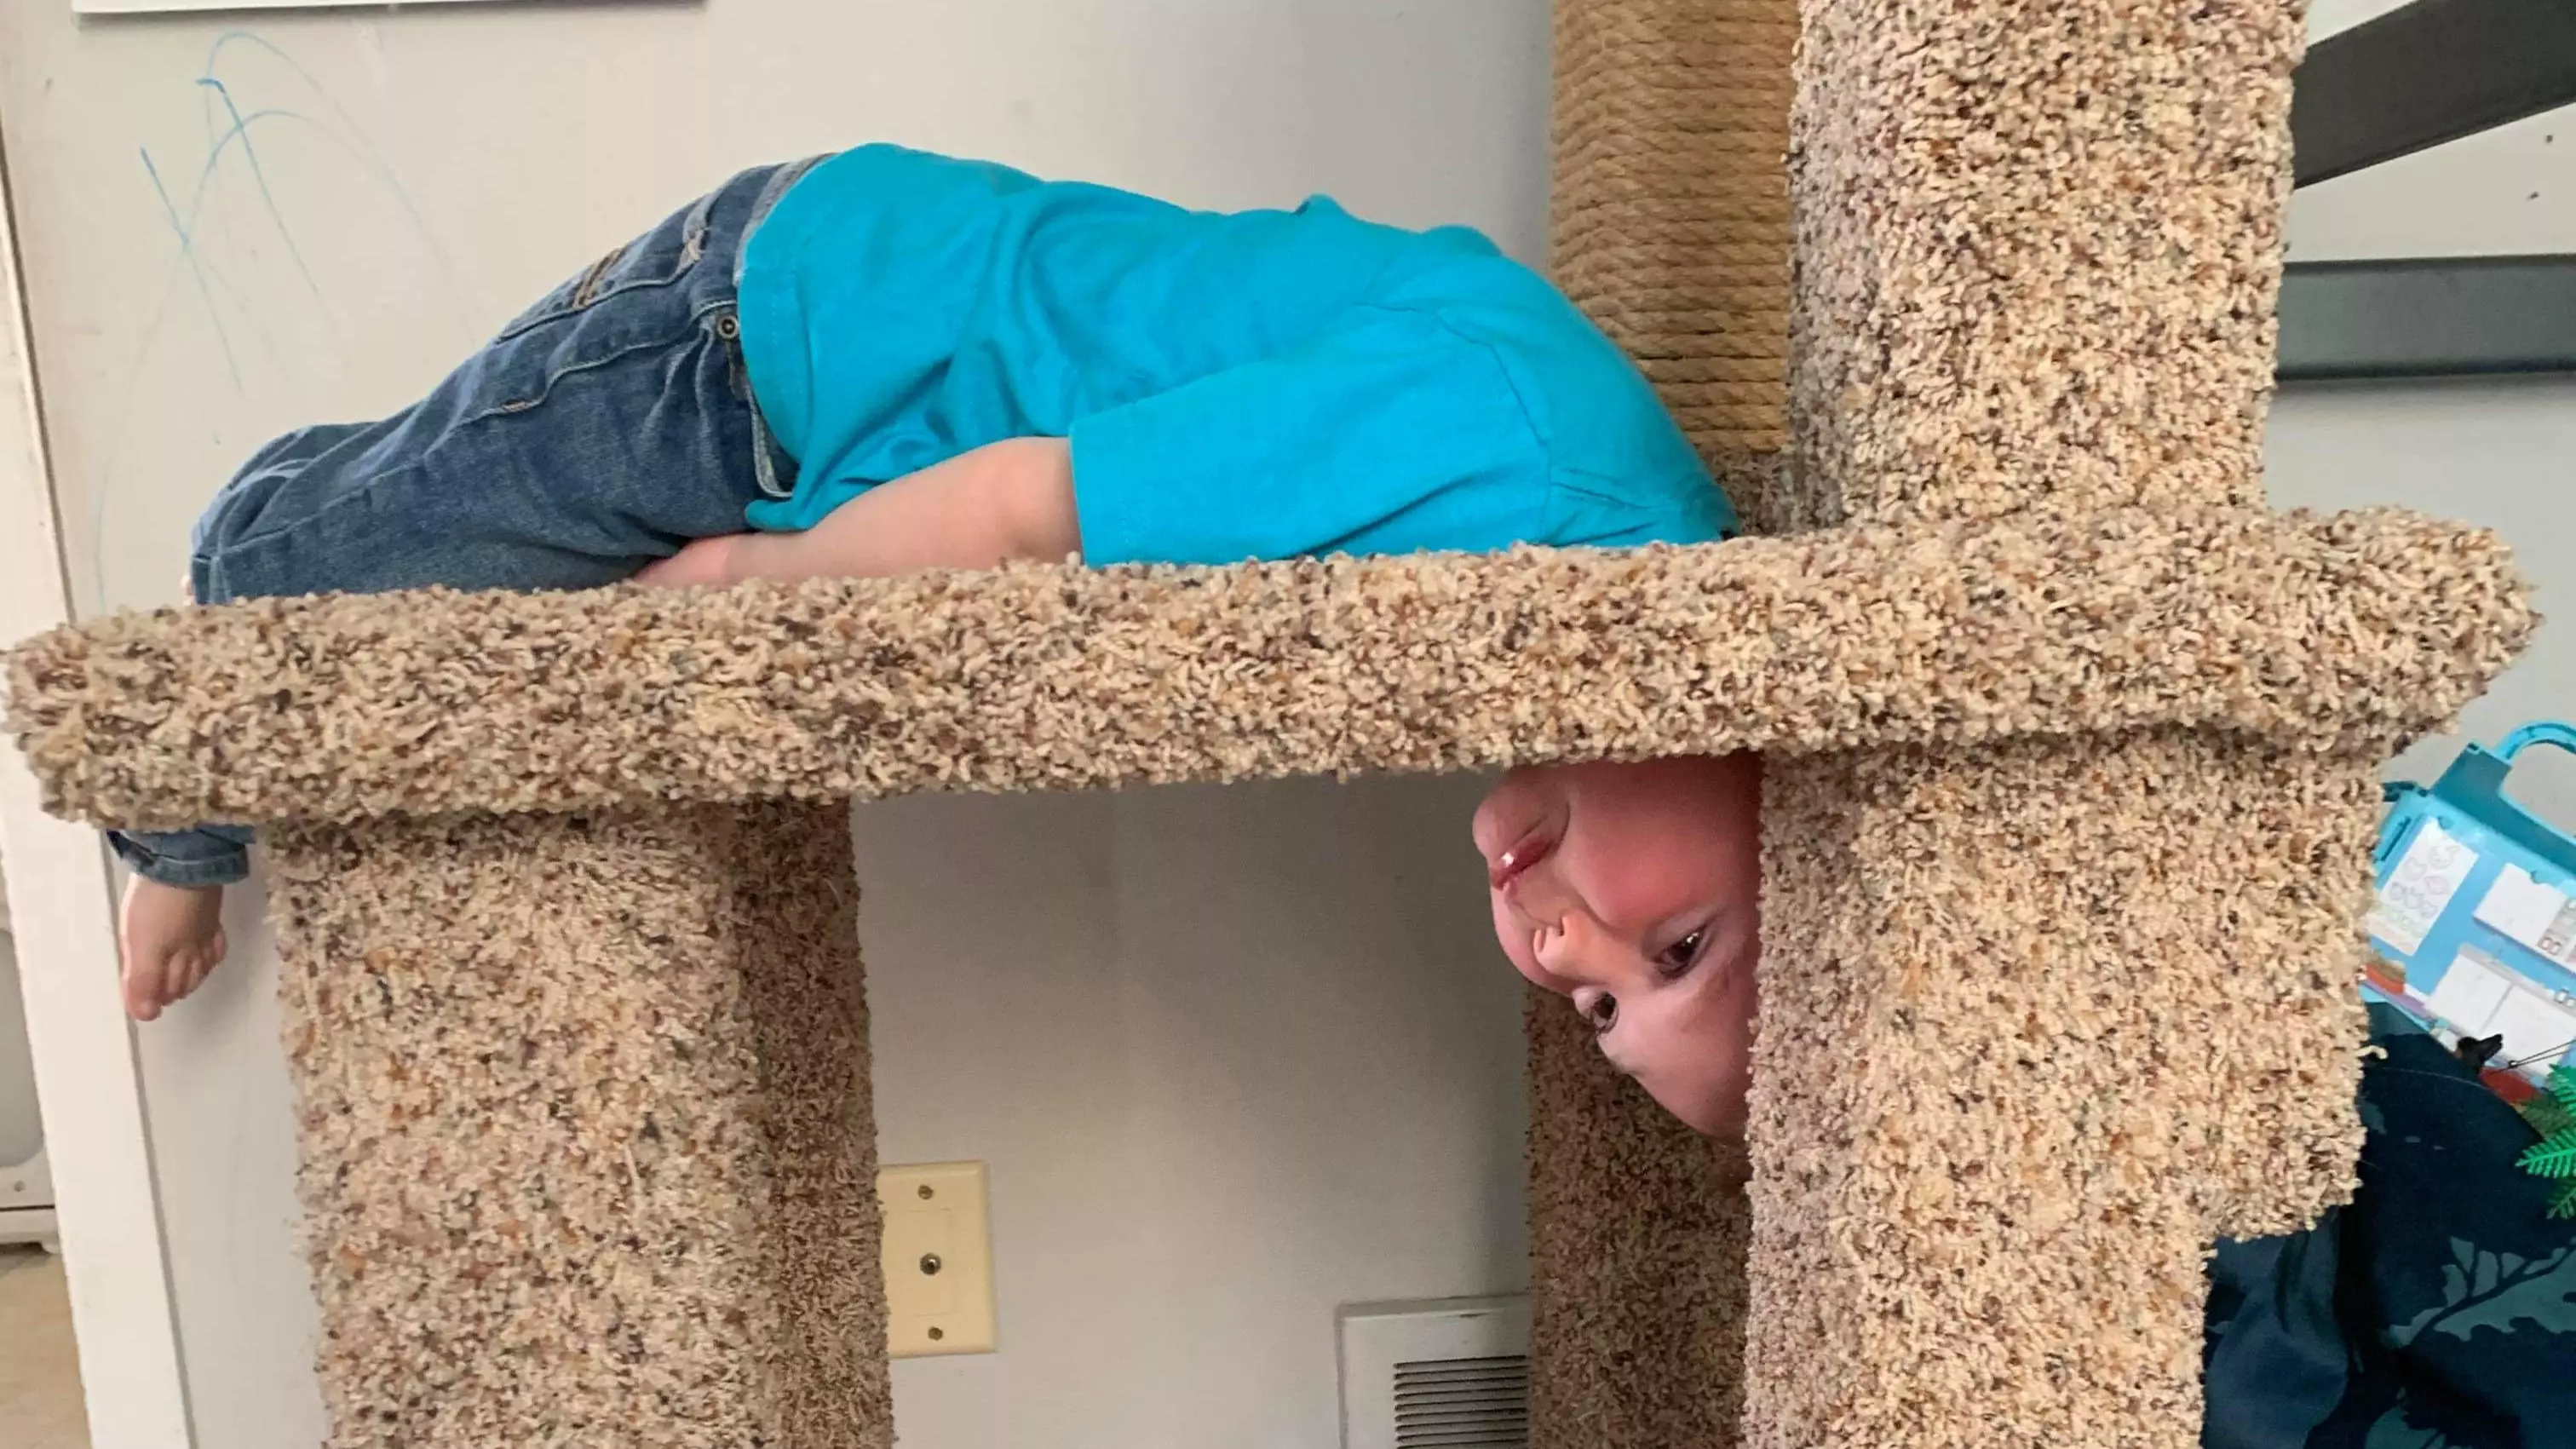 Firefighters Called To Rescue Boy Who Got His Head Stuck In Cat's Scratch Post